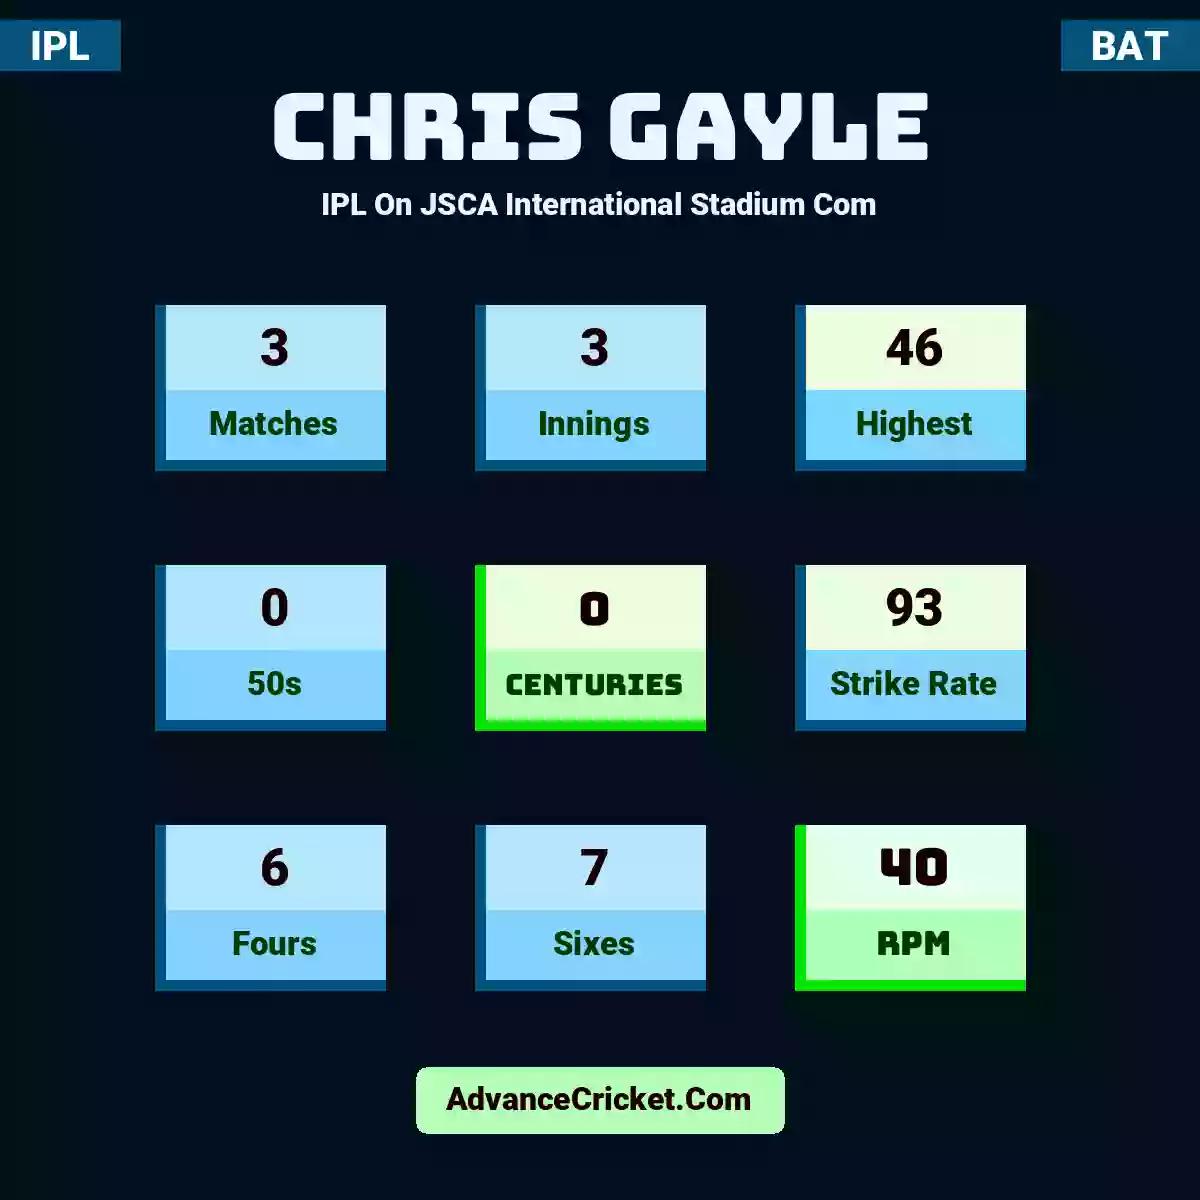 Chris Gayle IPL  On JSCA International Stadium Com, Chris Gayle played 3 matches, scored 46 runs as highest, 0 half-centuries, and 0 centuries, with a strike rate of 93. C.Gayle hit 6 fours and 7 sixes, with an RPM of 40.